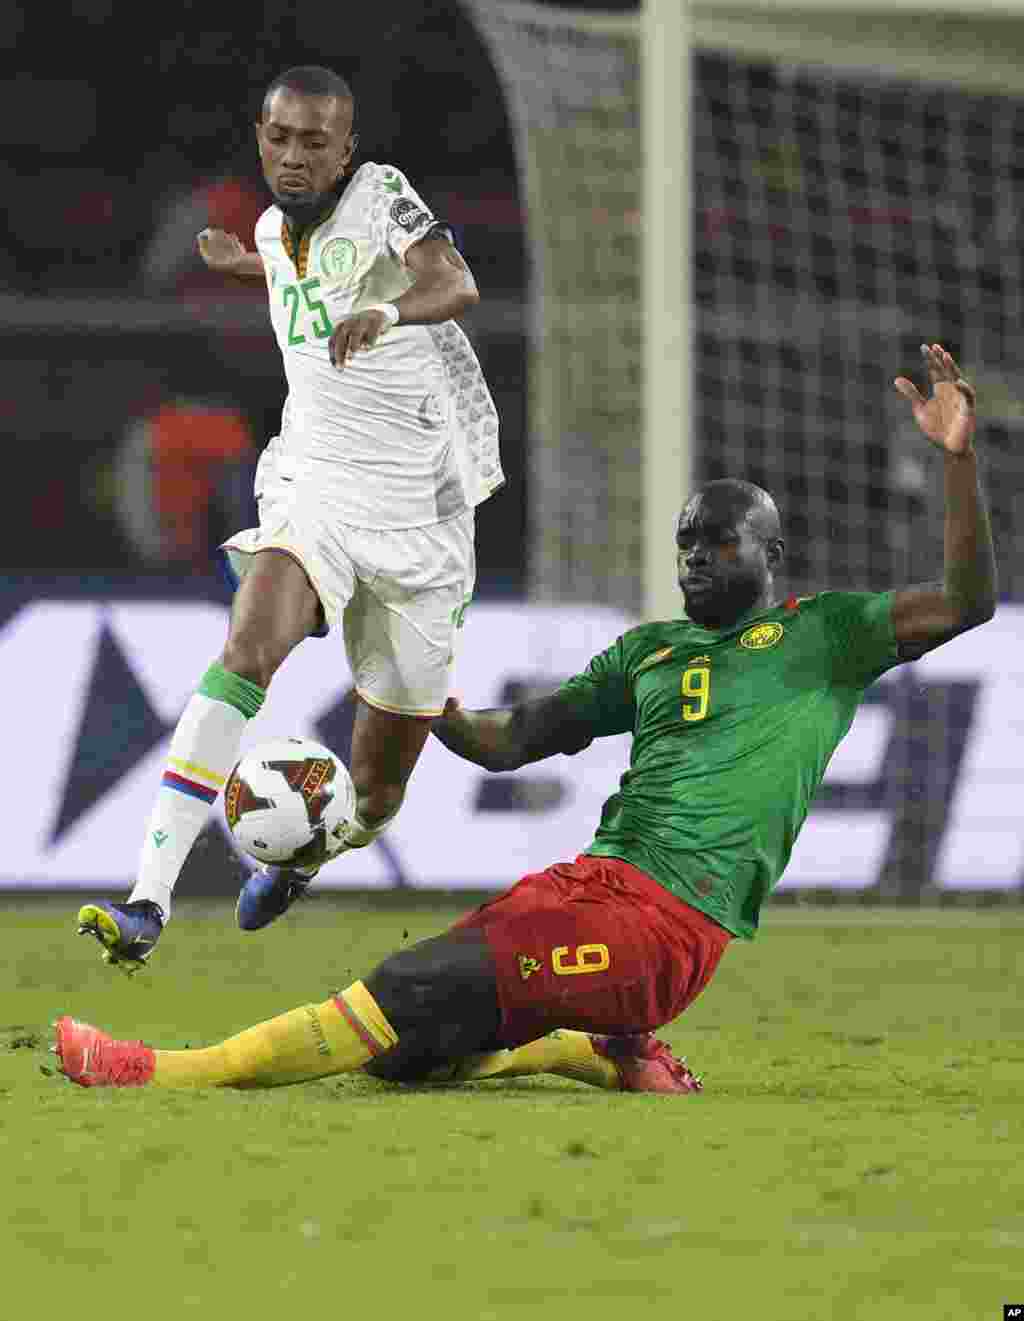 Comoros&#39; Moussa Djoumoi, jumps as he avoids a sliding tackle attempt from Cameroon&#39;s Stephane Bahoken.